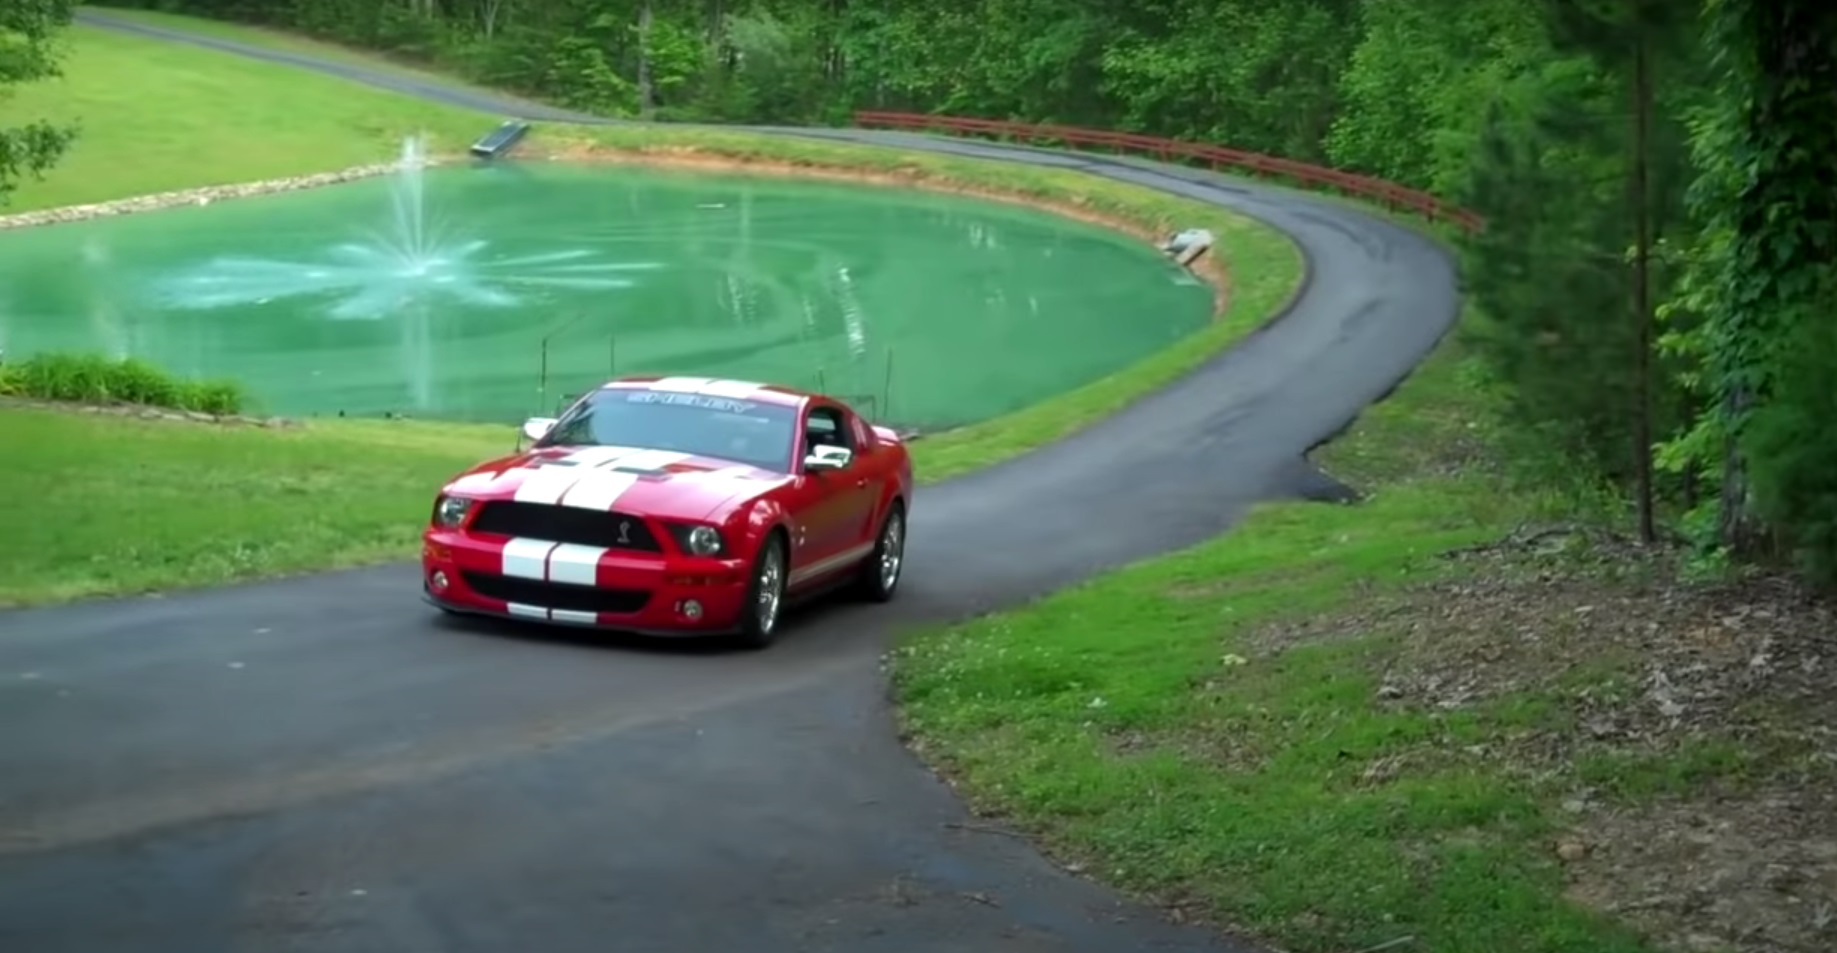 Video: 2007 Ford Mustang Shelby GT-500 Overview + Bonus Burnout!